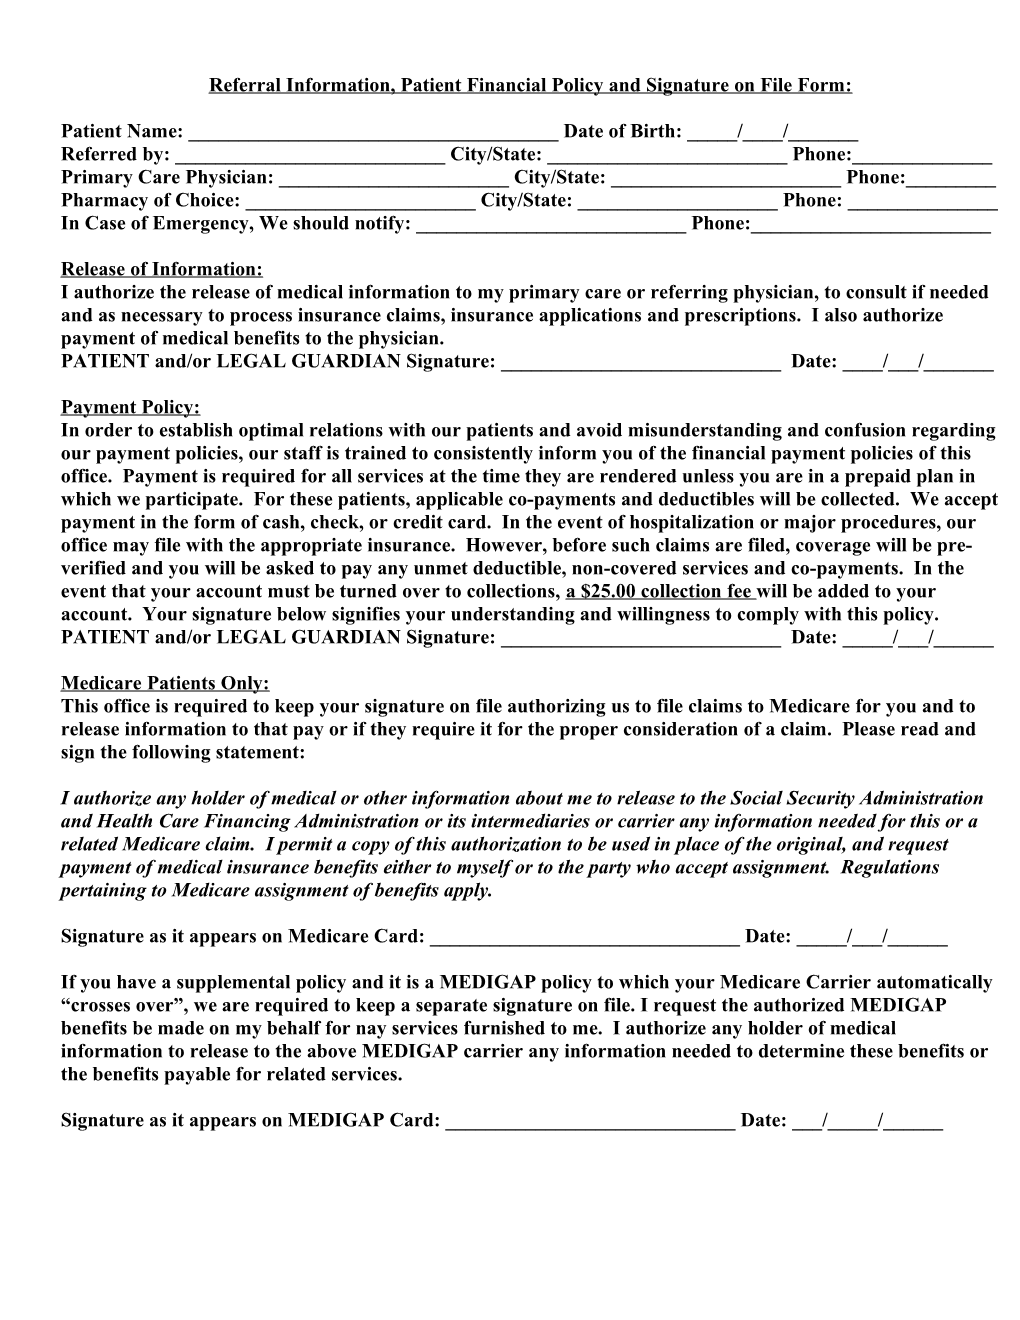 Referral Information, Patient Financial Policy and Signature on File Form